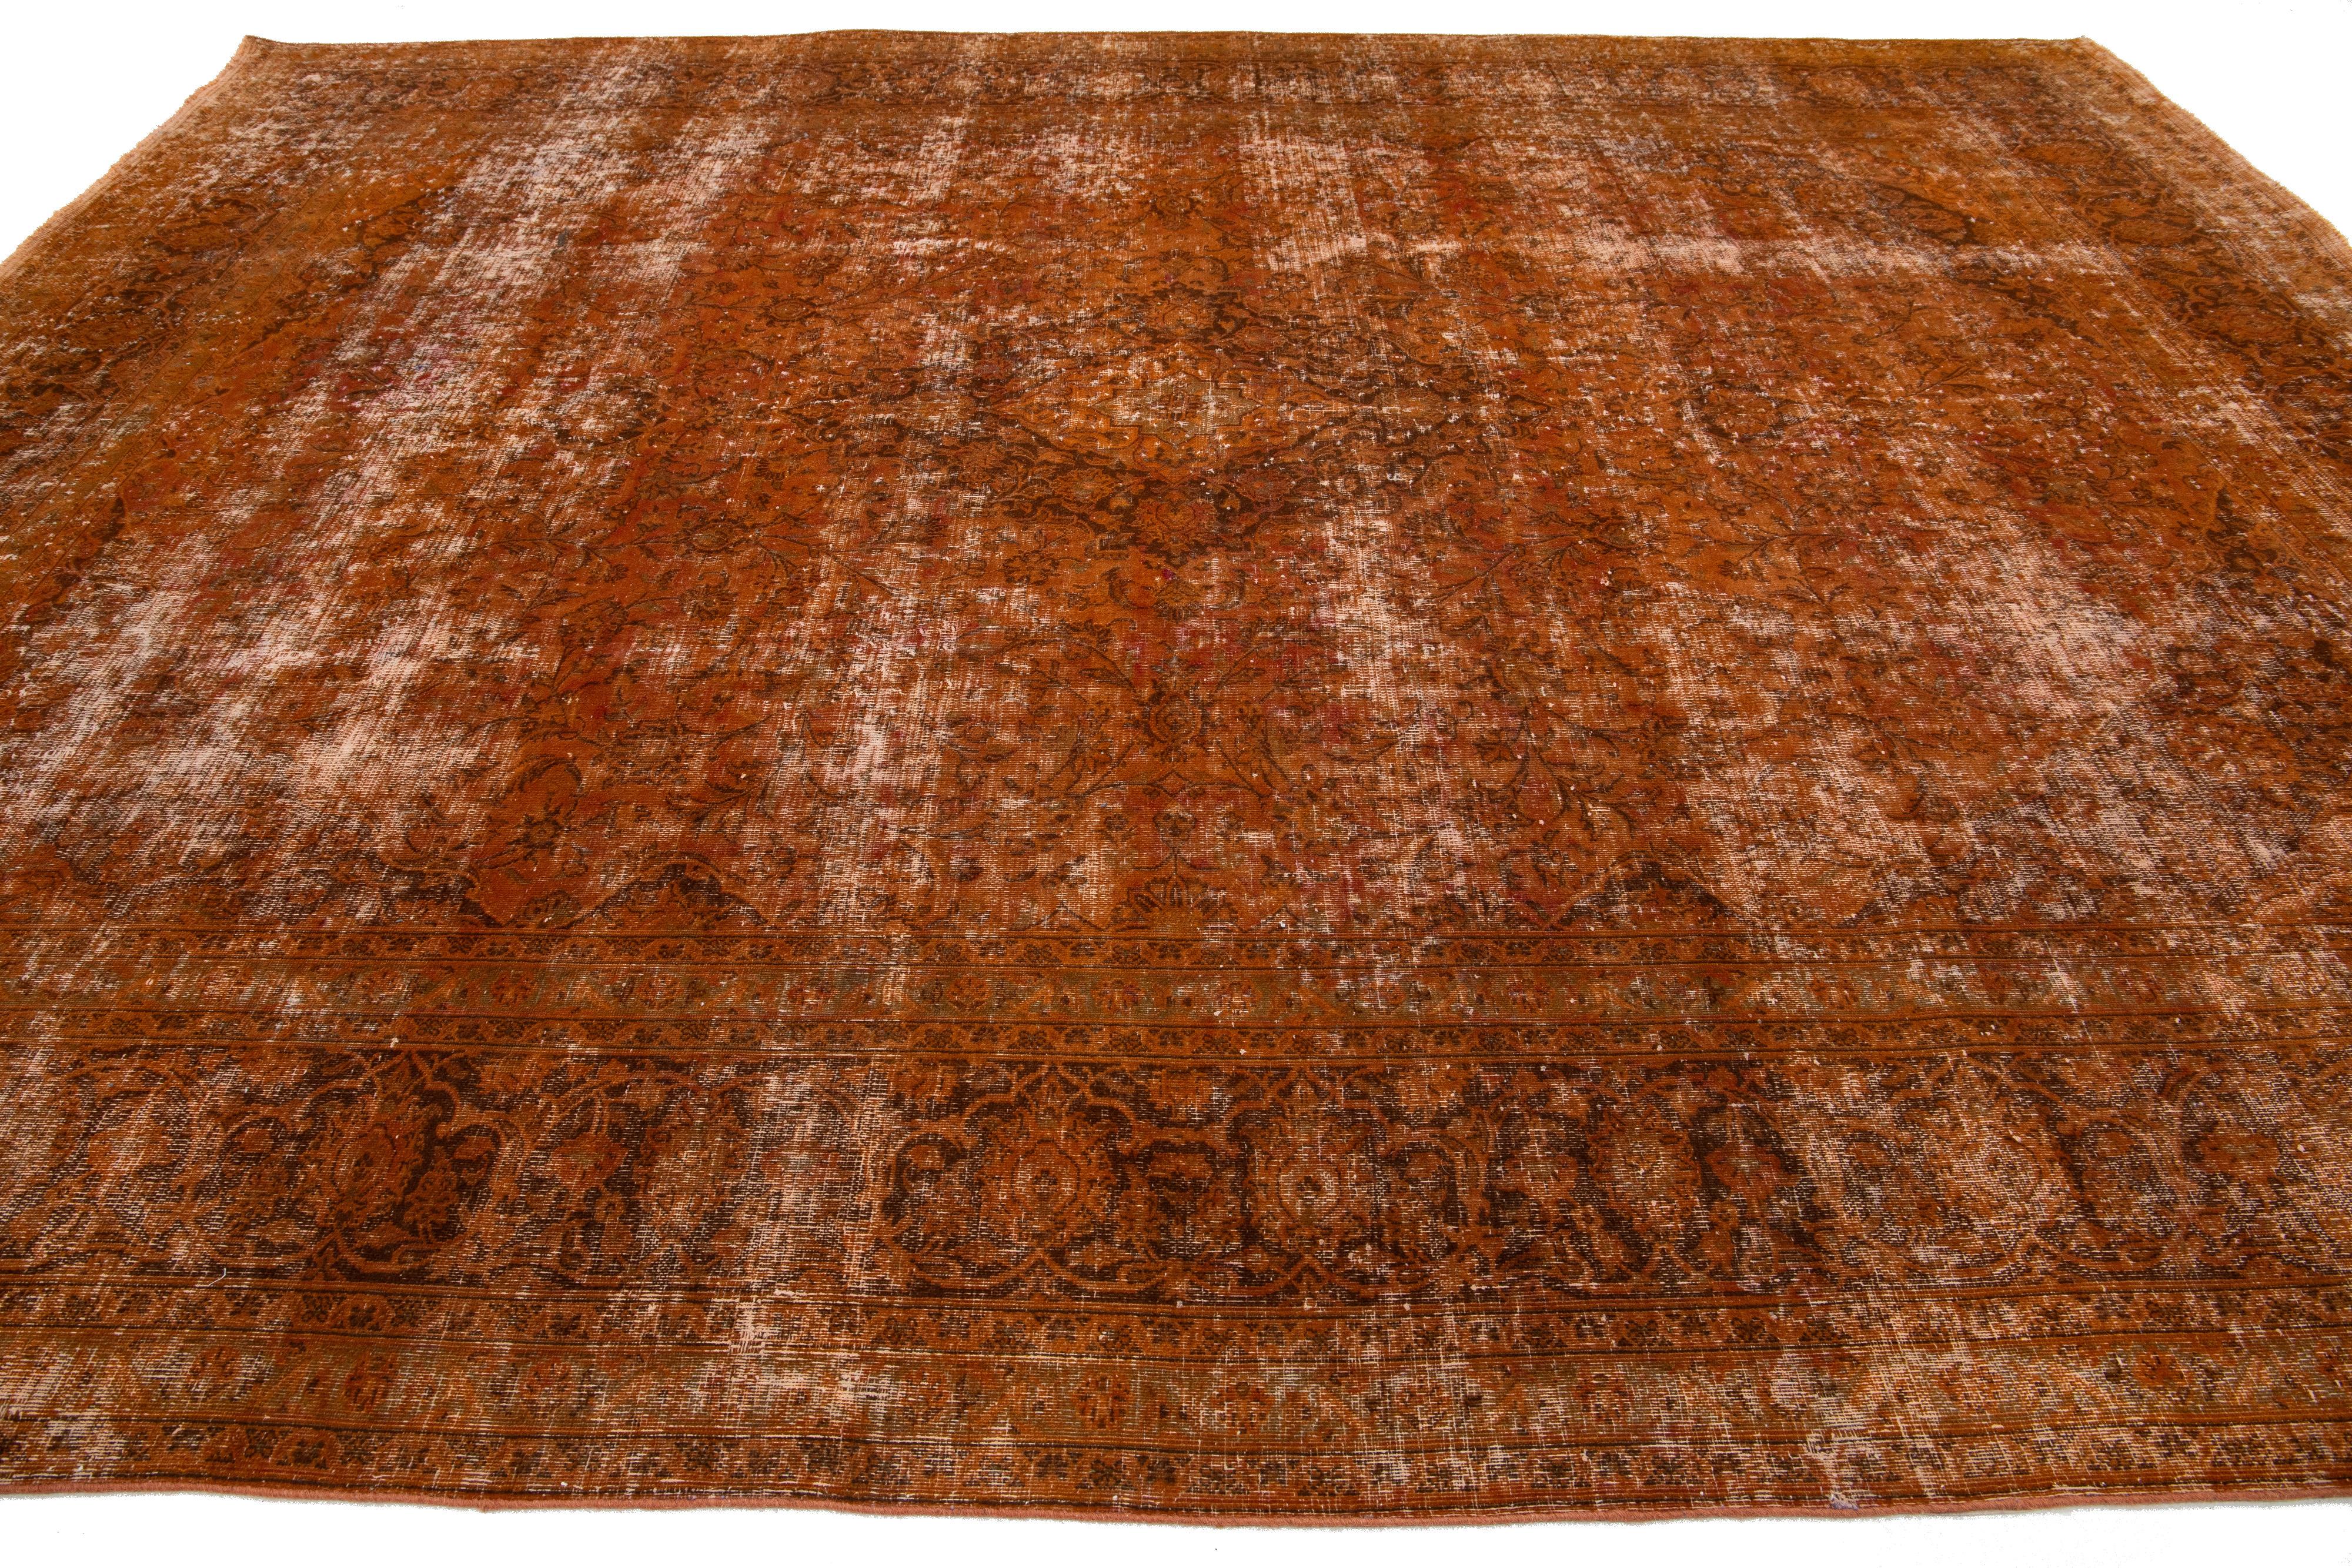 20th Century Antique Persian Overdyed Wool Rug In Orange With Floral Design For Sale